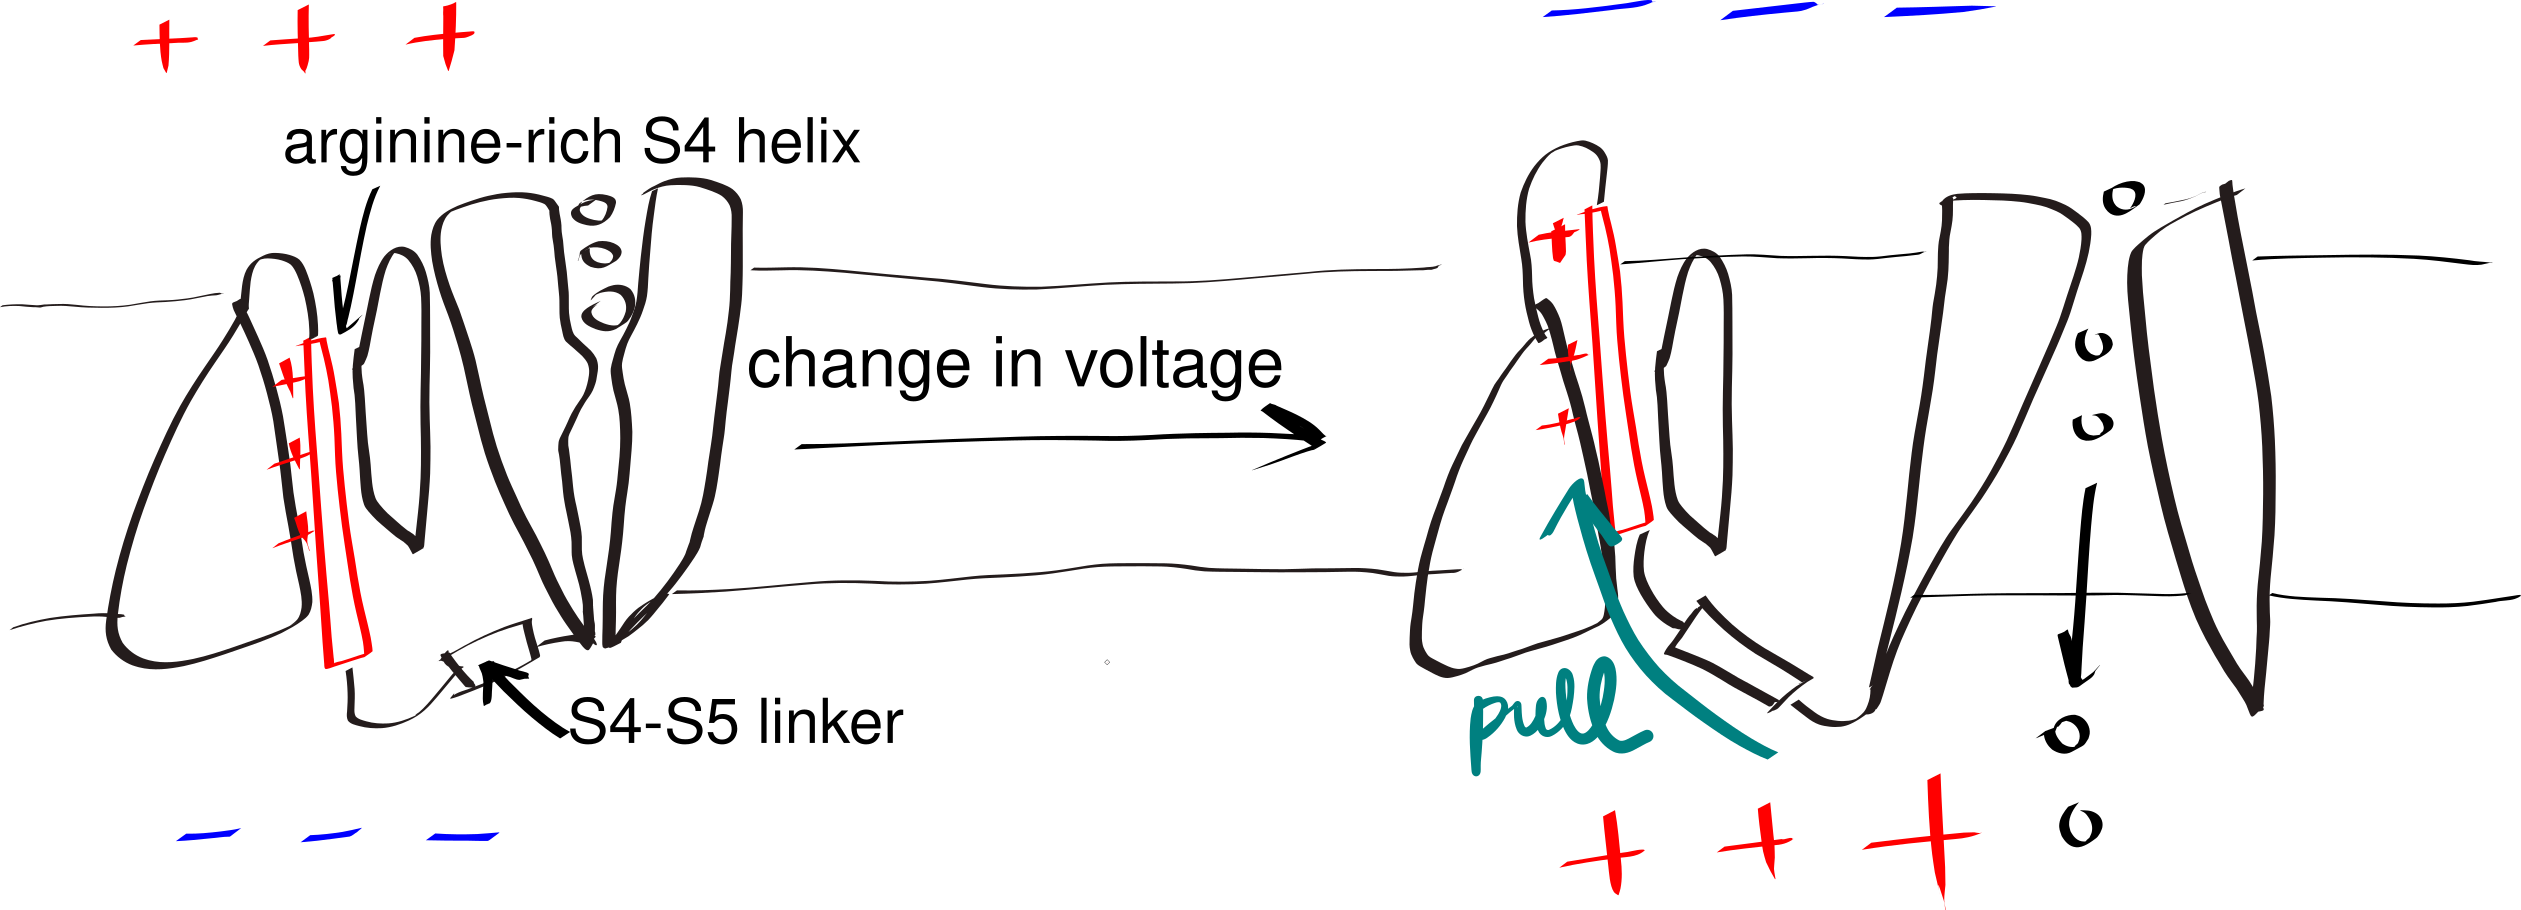 The gating mechanism of voltage-gated potassium channel. The S4 helix (red) is arginine-rich and thus positively charged. A linker connects S4 and S5 helix, the latter being a part of the pore domain. In resting state, the interior (bottom) of the cell is negatively charged relative to the exterior (top). A change in voltage causes the S4 helix to move upwards due to electrostatic force, and it pulls the gate open via the S4-S5 linker.